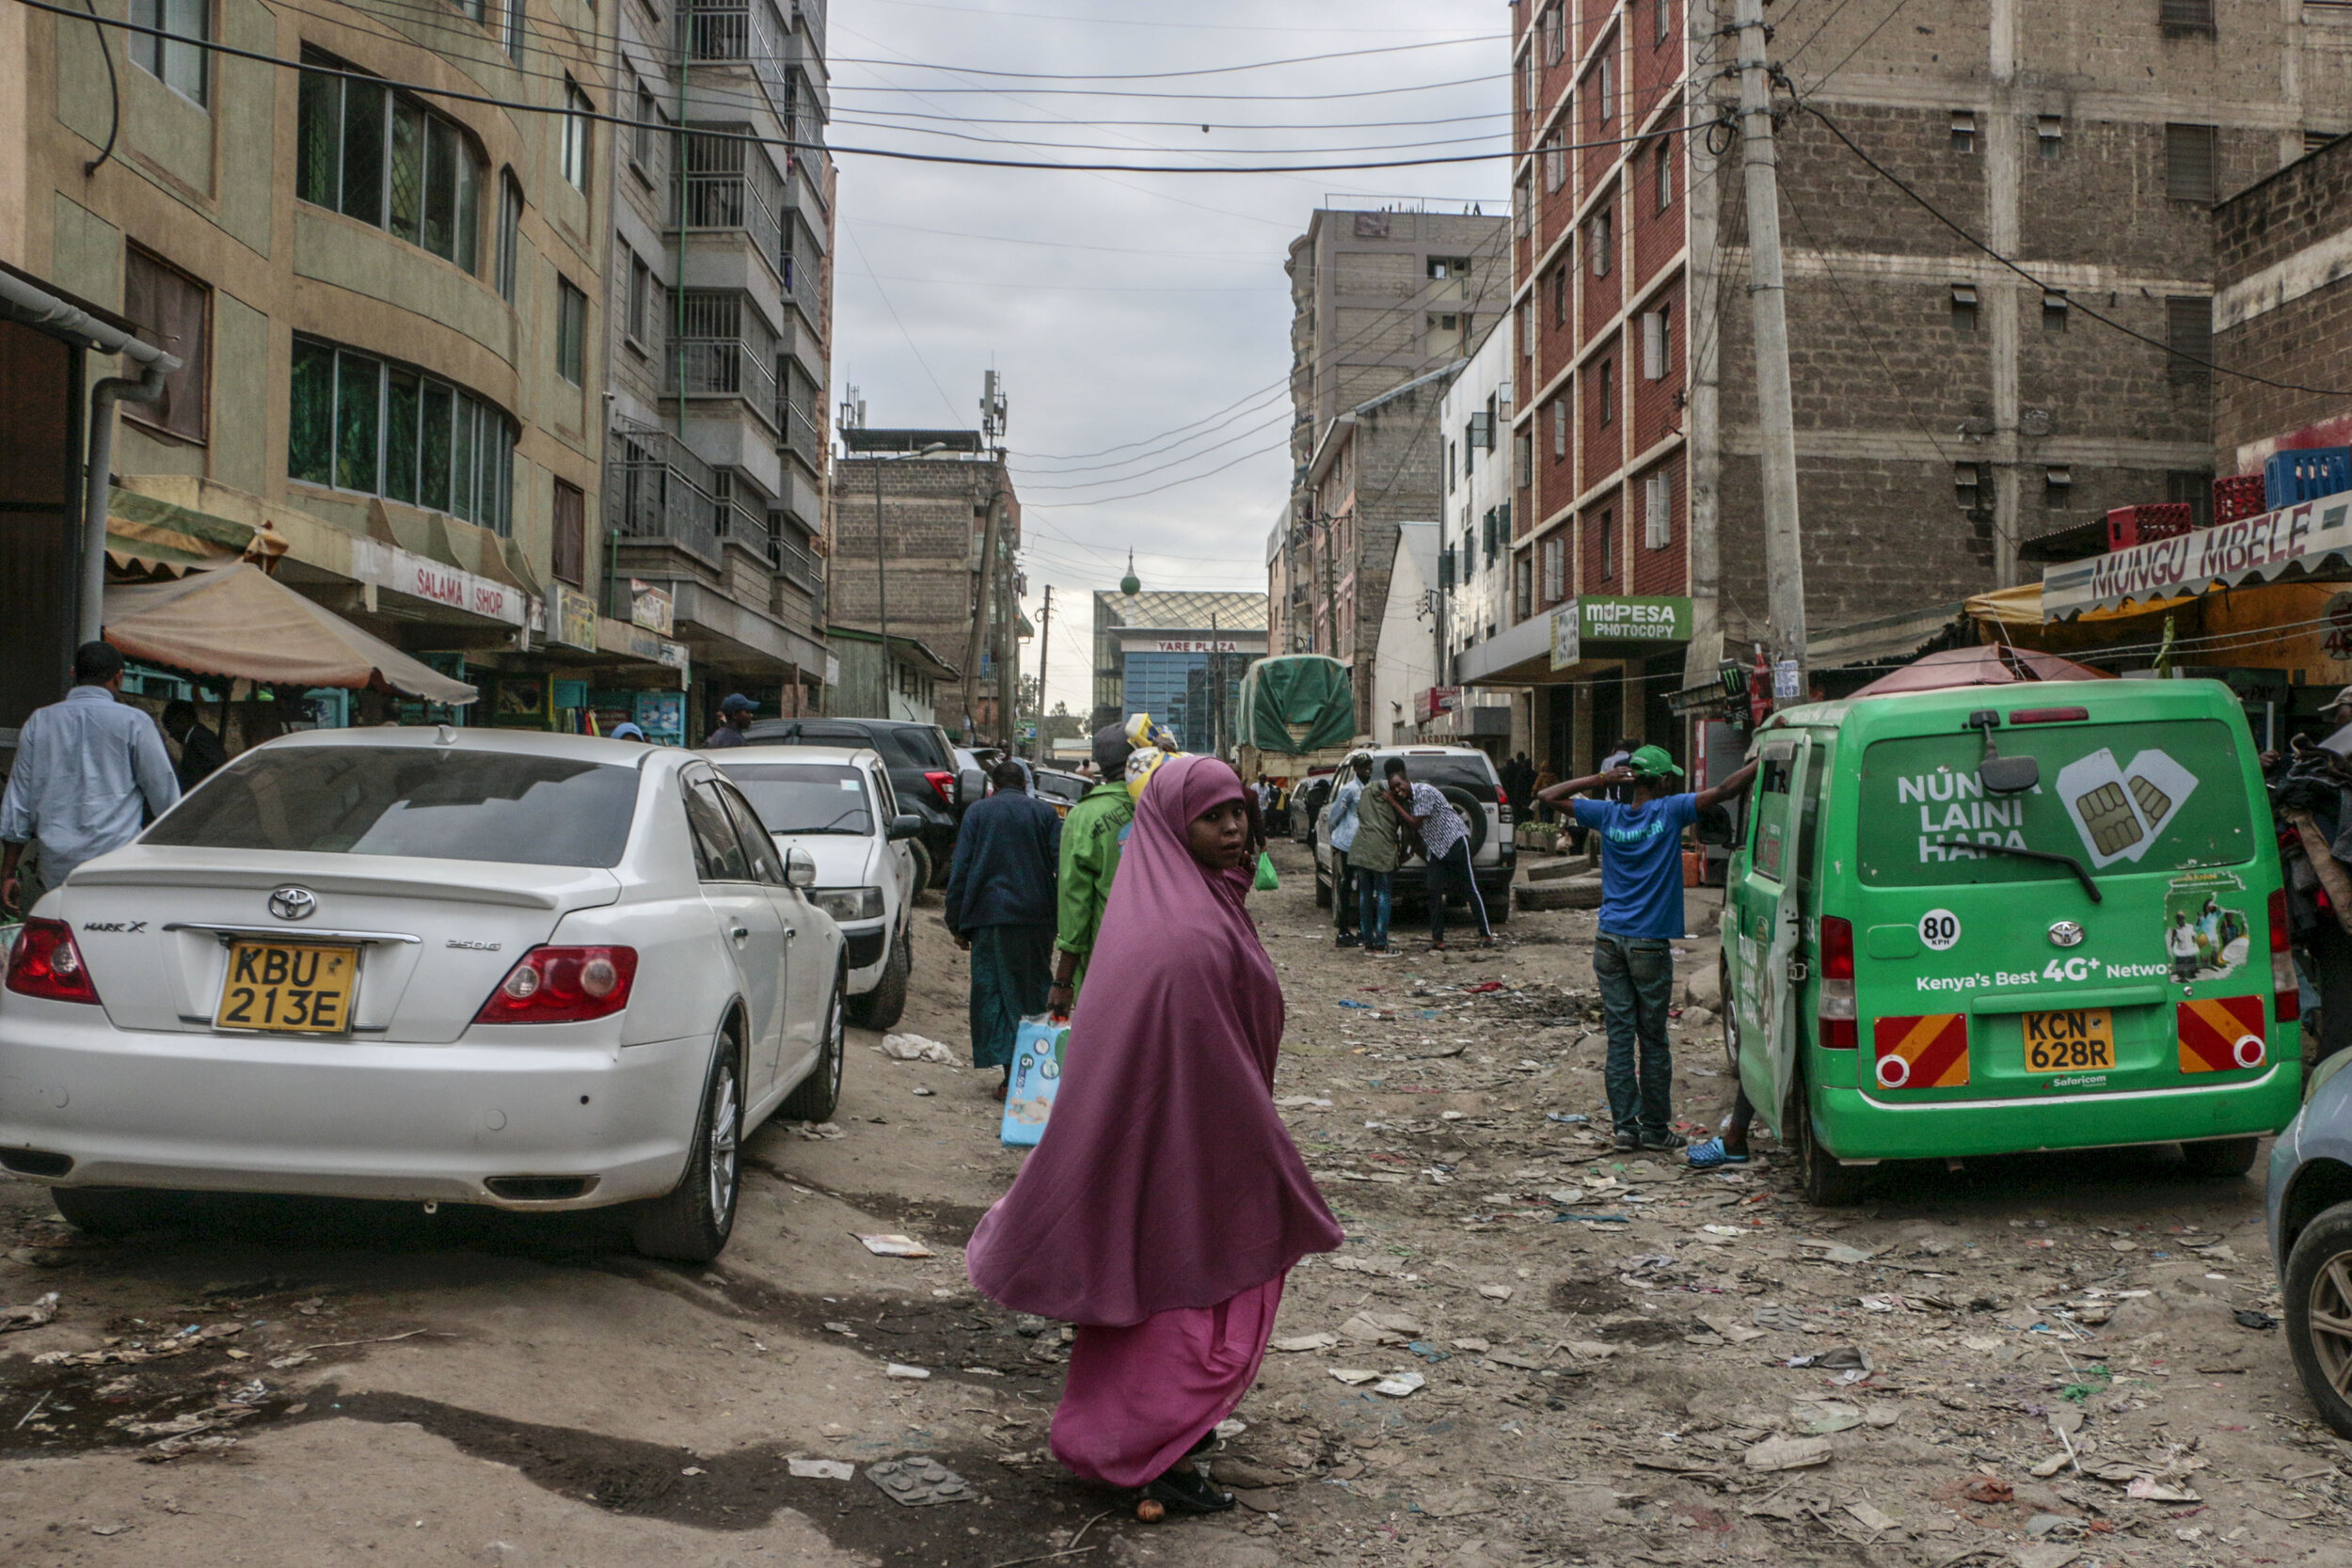  Hamdi Kosar pauses while walking through the streets of Eastleigh, a predominantly Muslim and Somali neighborhood in Nairobi, Aug. 16, 2019. Many Somali refugees shop here while they are in the resettlement centers before they head elsewhere to seek